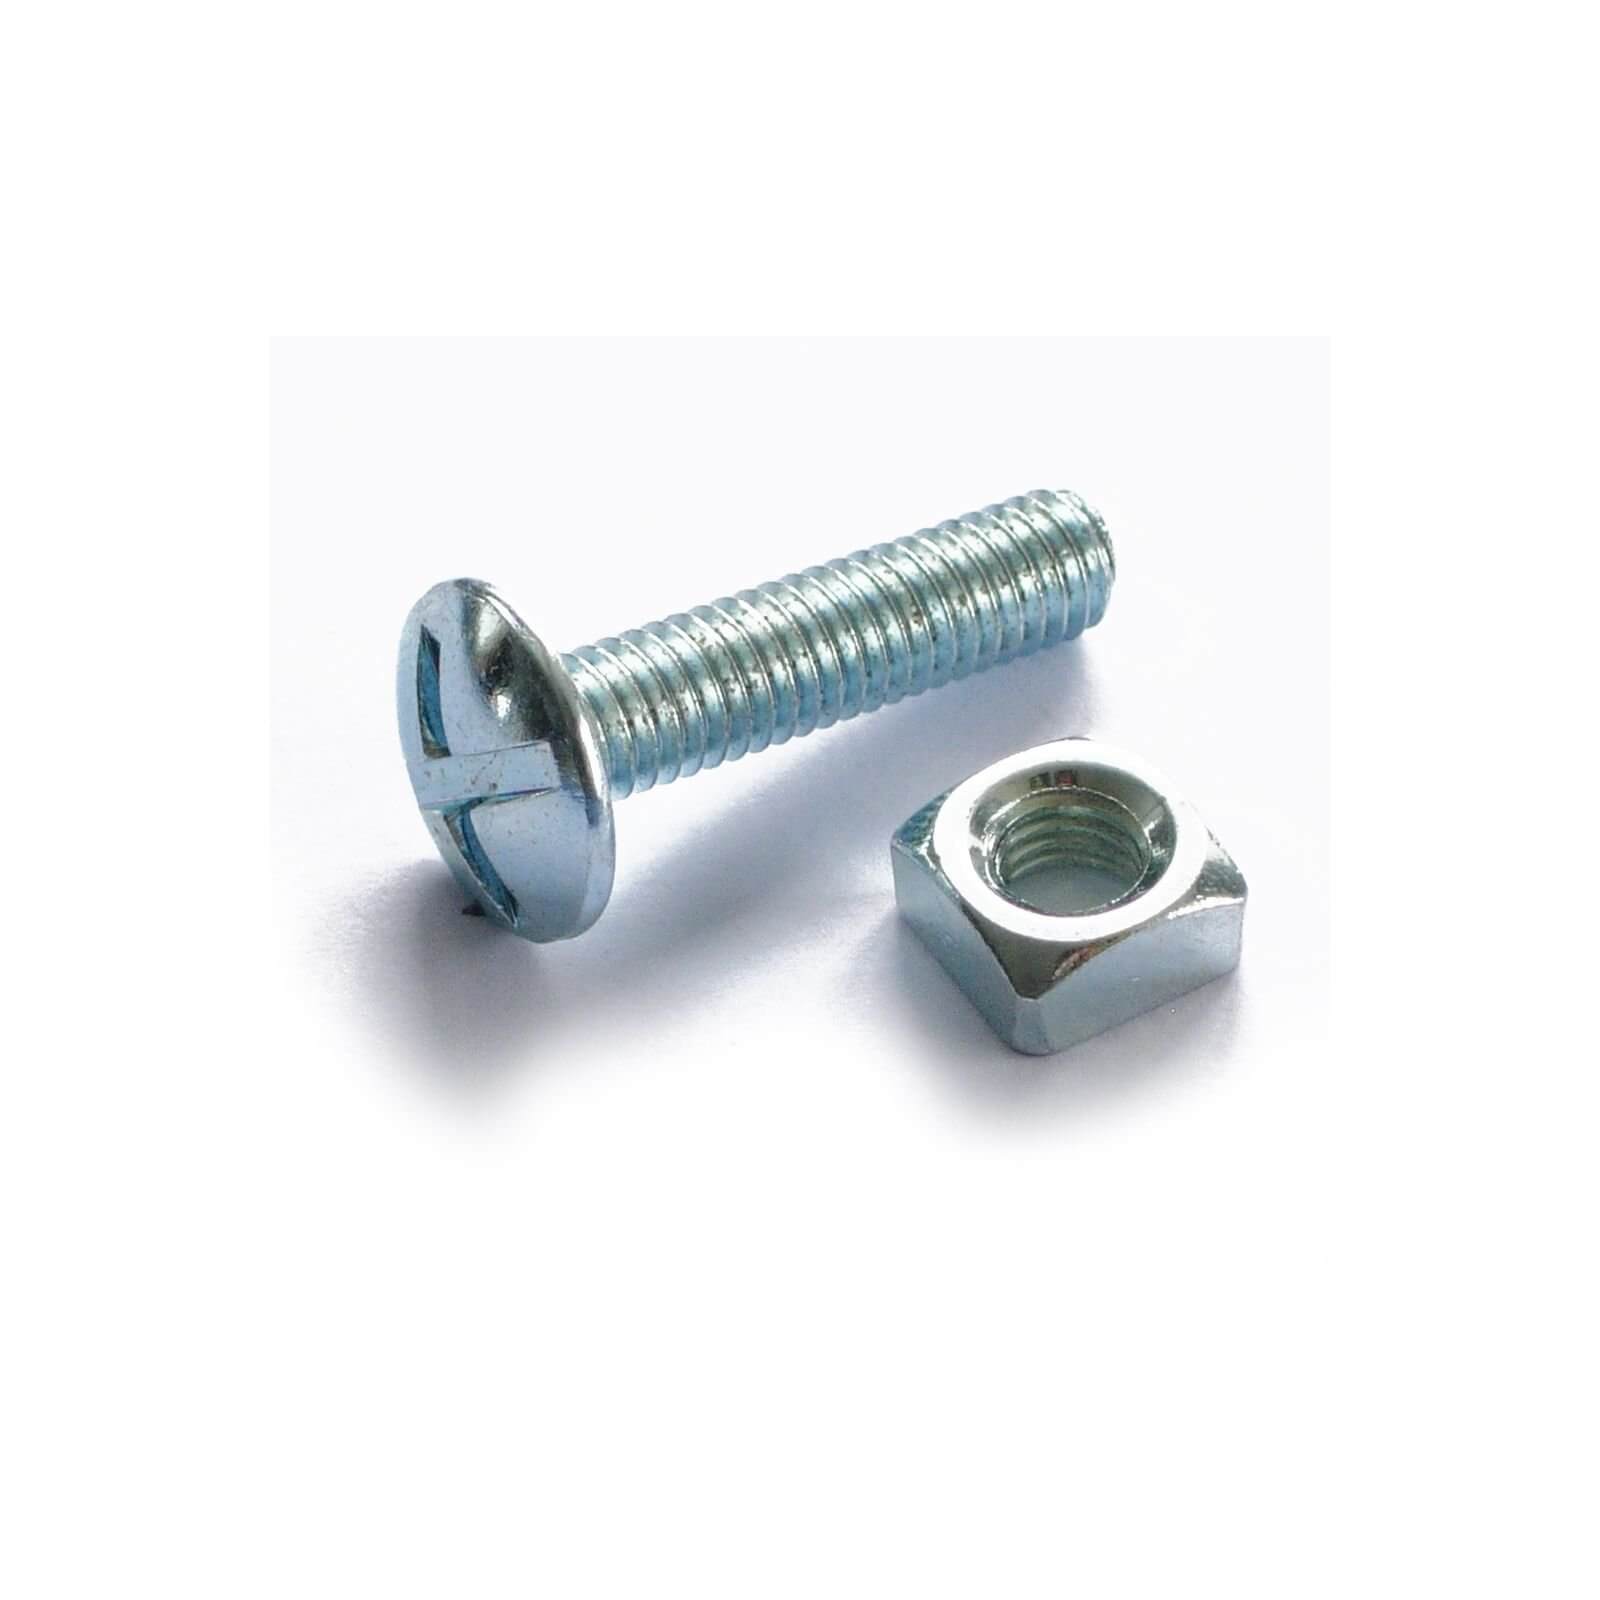 Roofing Bolt - Bright Zinc Plated - M8 40mm - 10 Pack